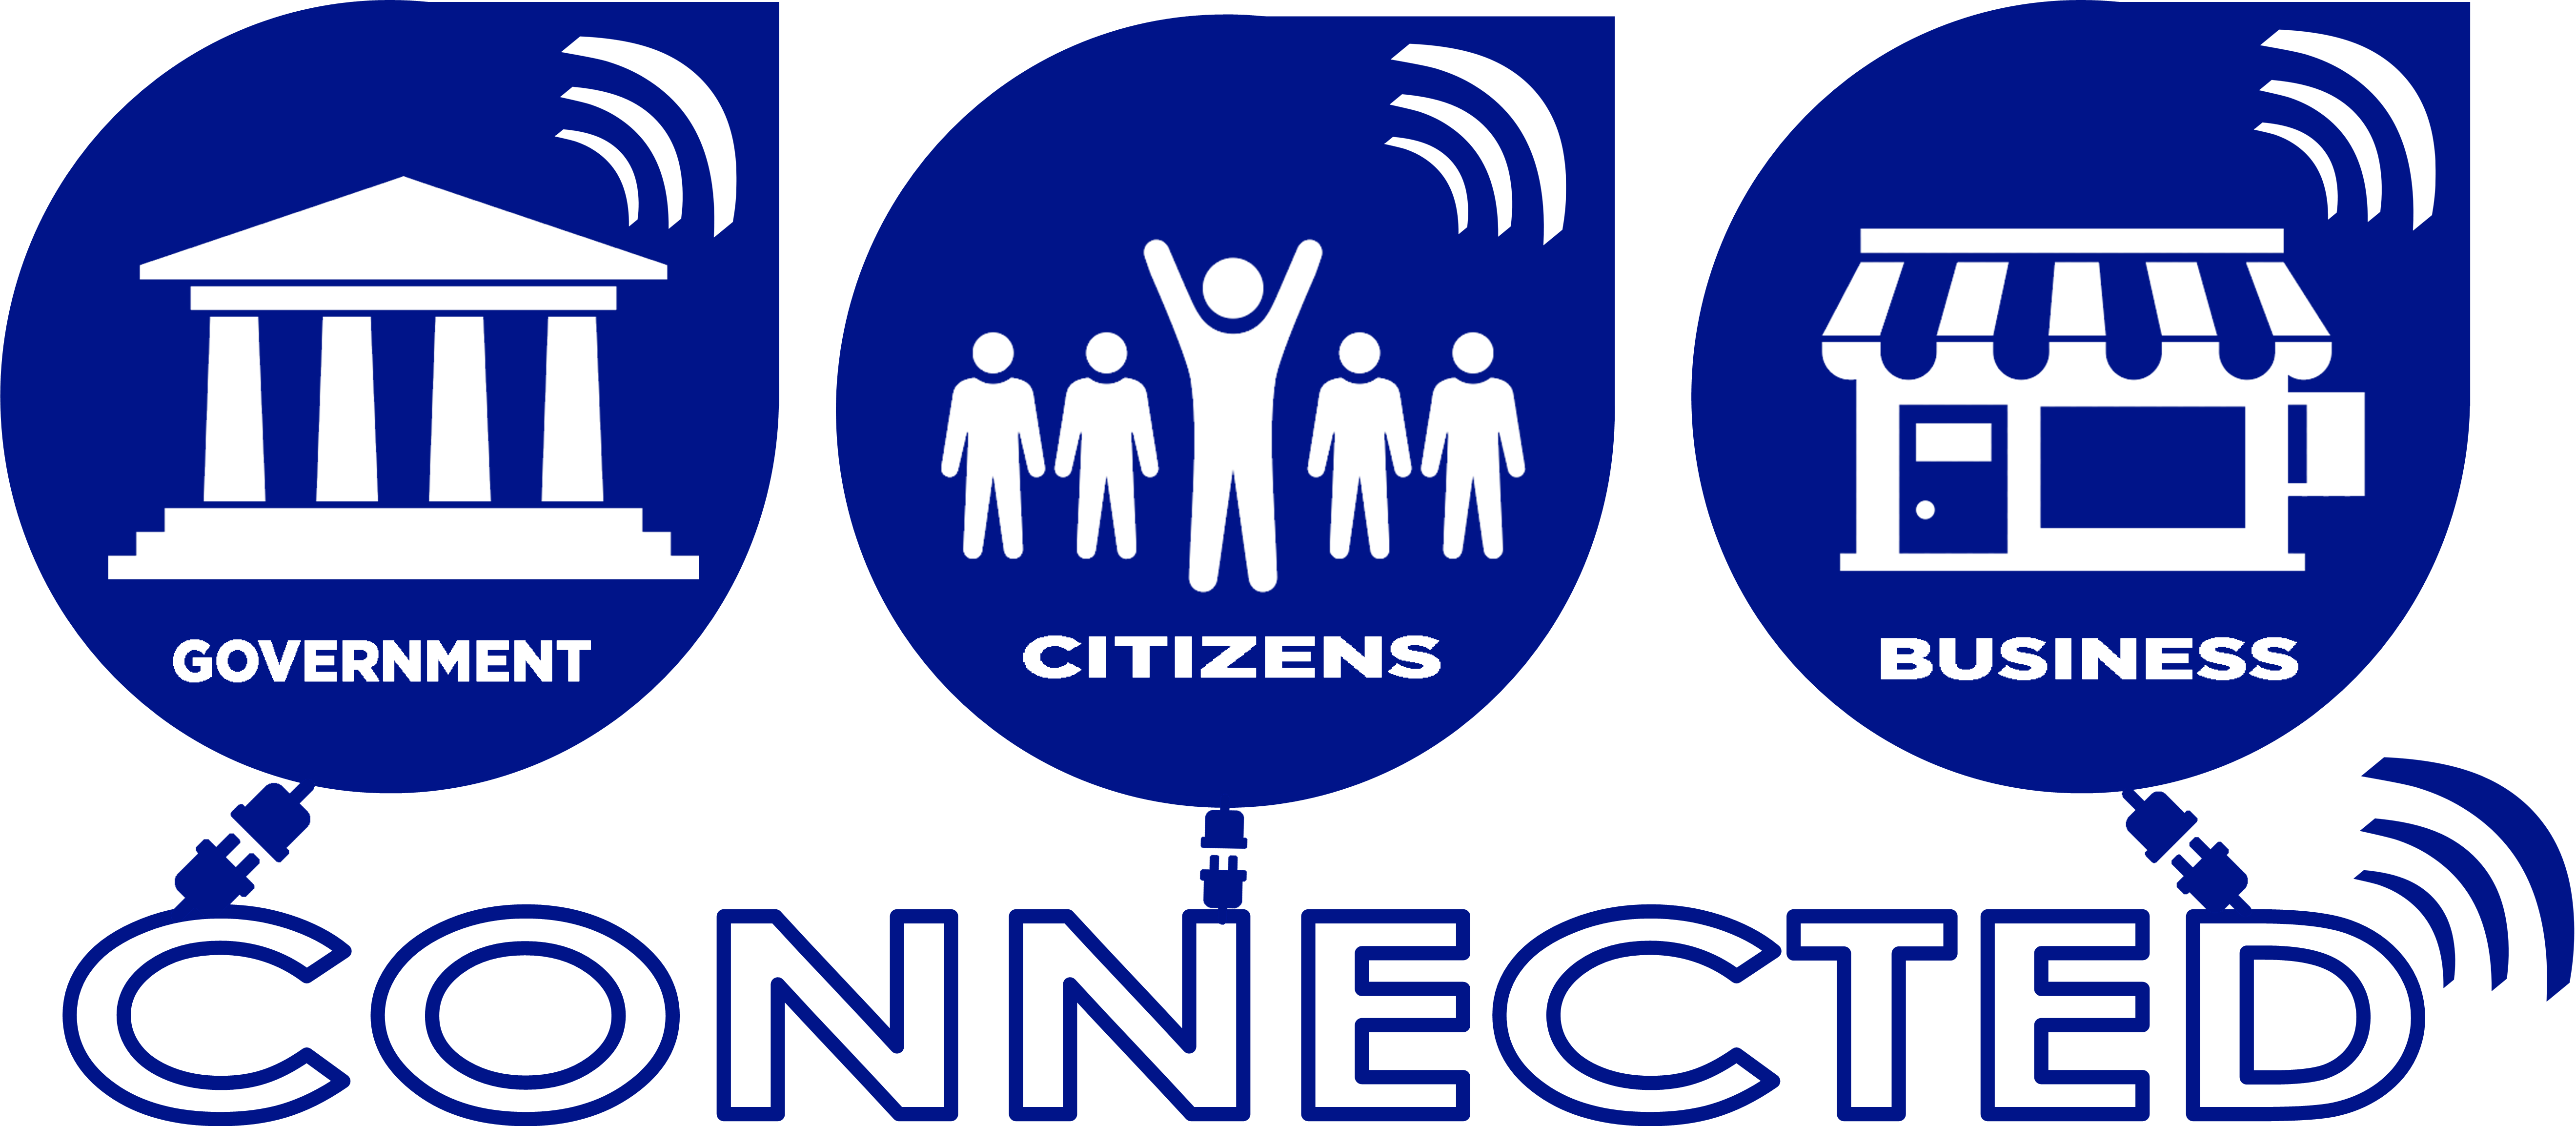 Picture illustrating connected government, business and citizens